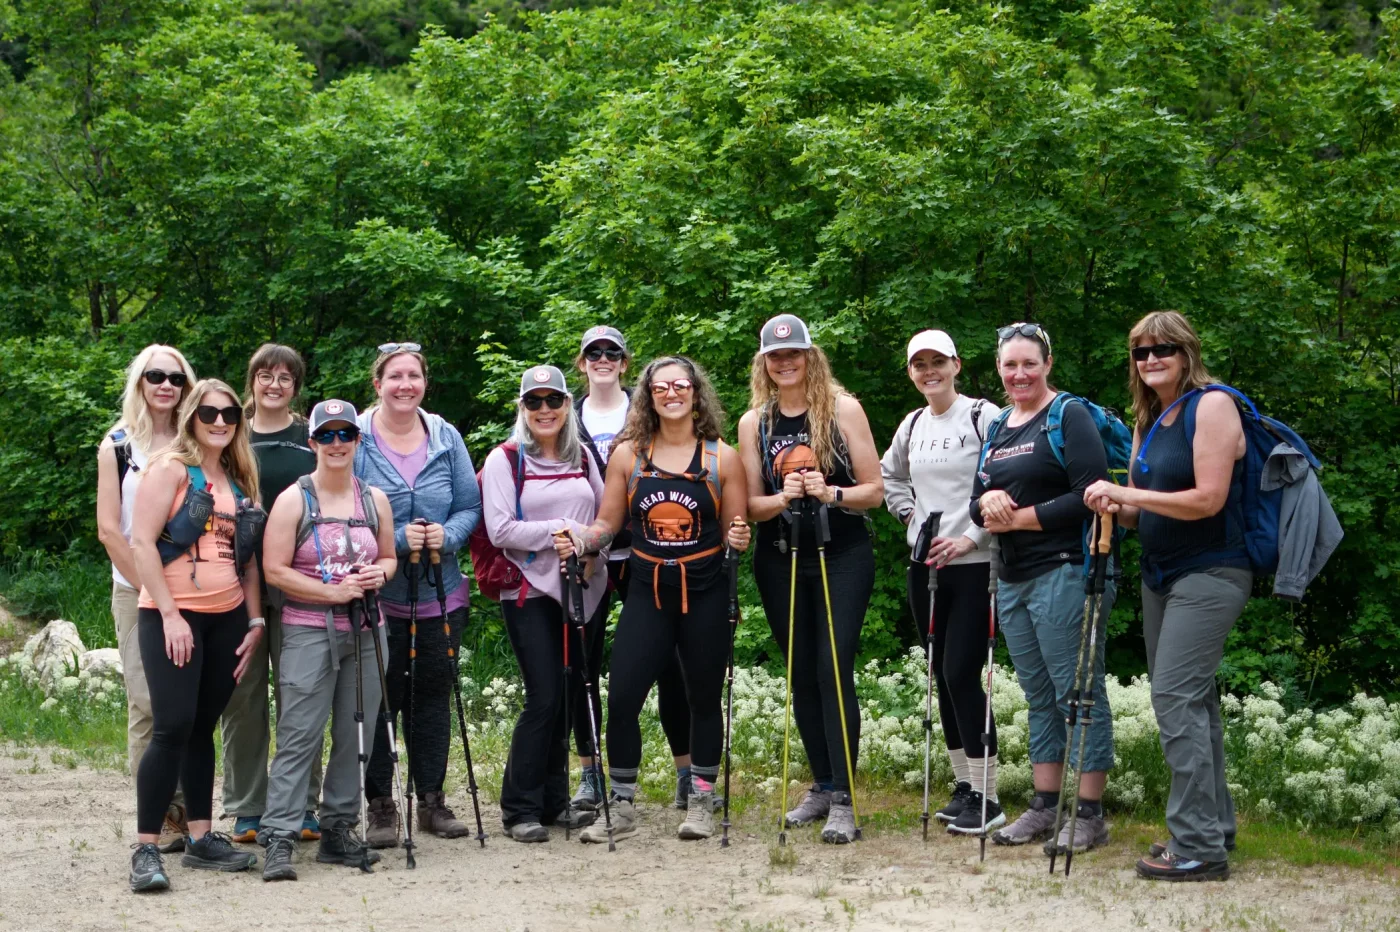 Members of the Women’s Wine Hiking Society, including co-founders Cindy Vance and Angelique Fish, gather together for a “Trailblazing Adventure” at the Farmington Creek Trail. Photo: Em Behringer